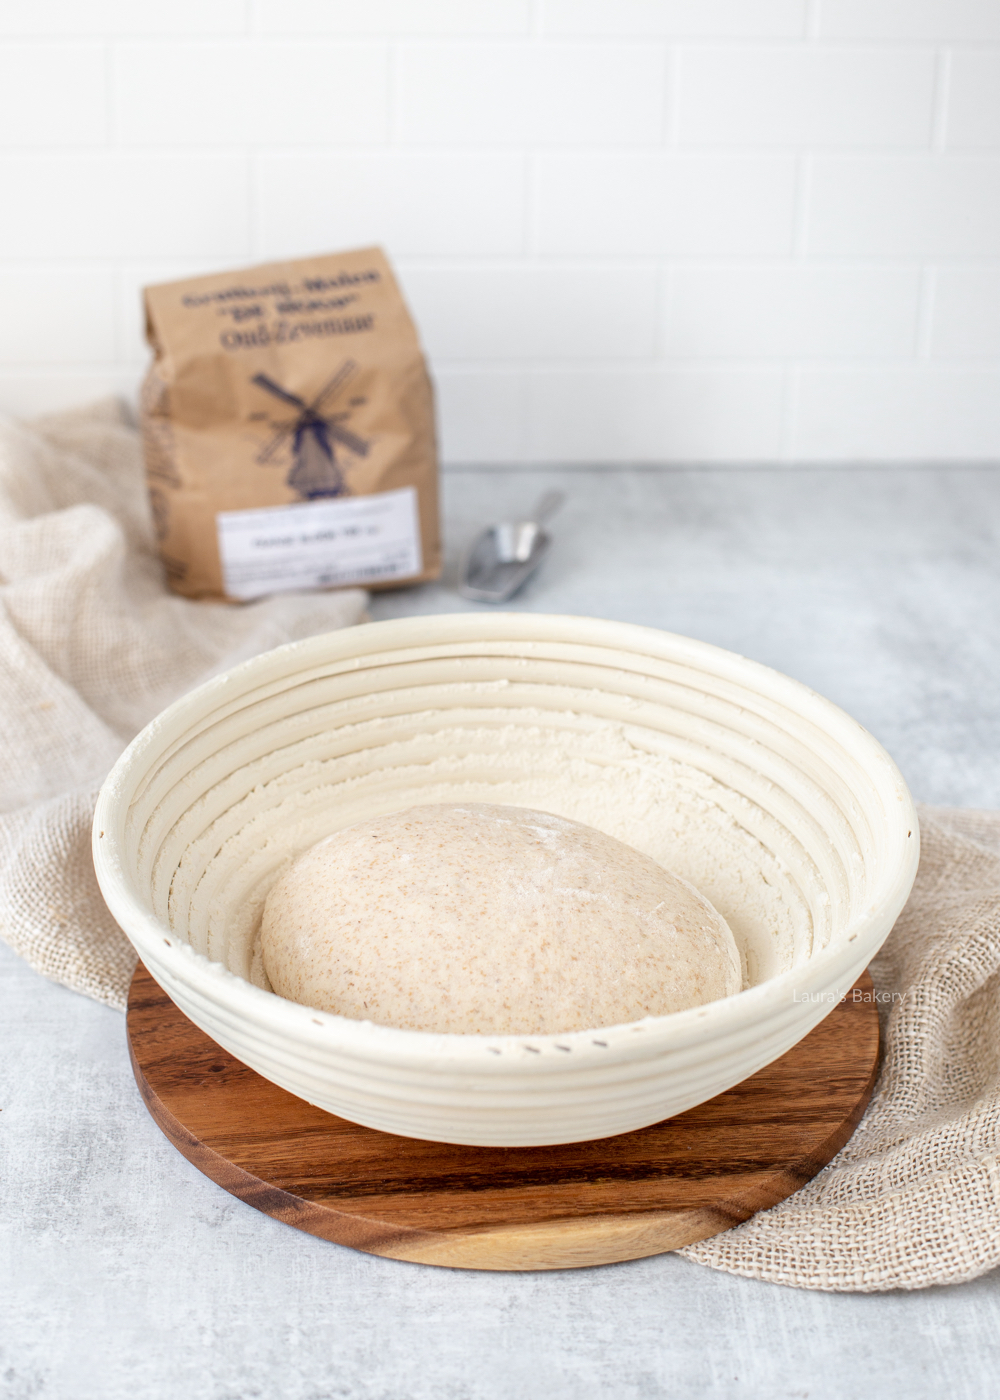 How to store bread dough in the fridge 5